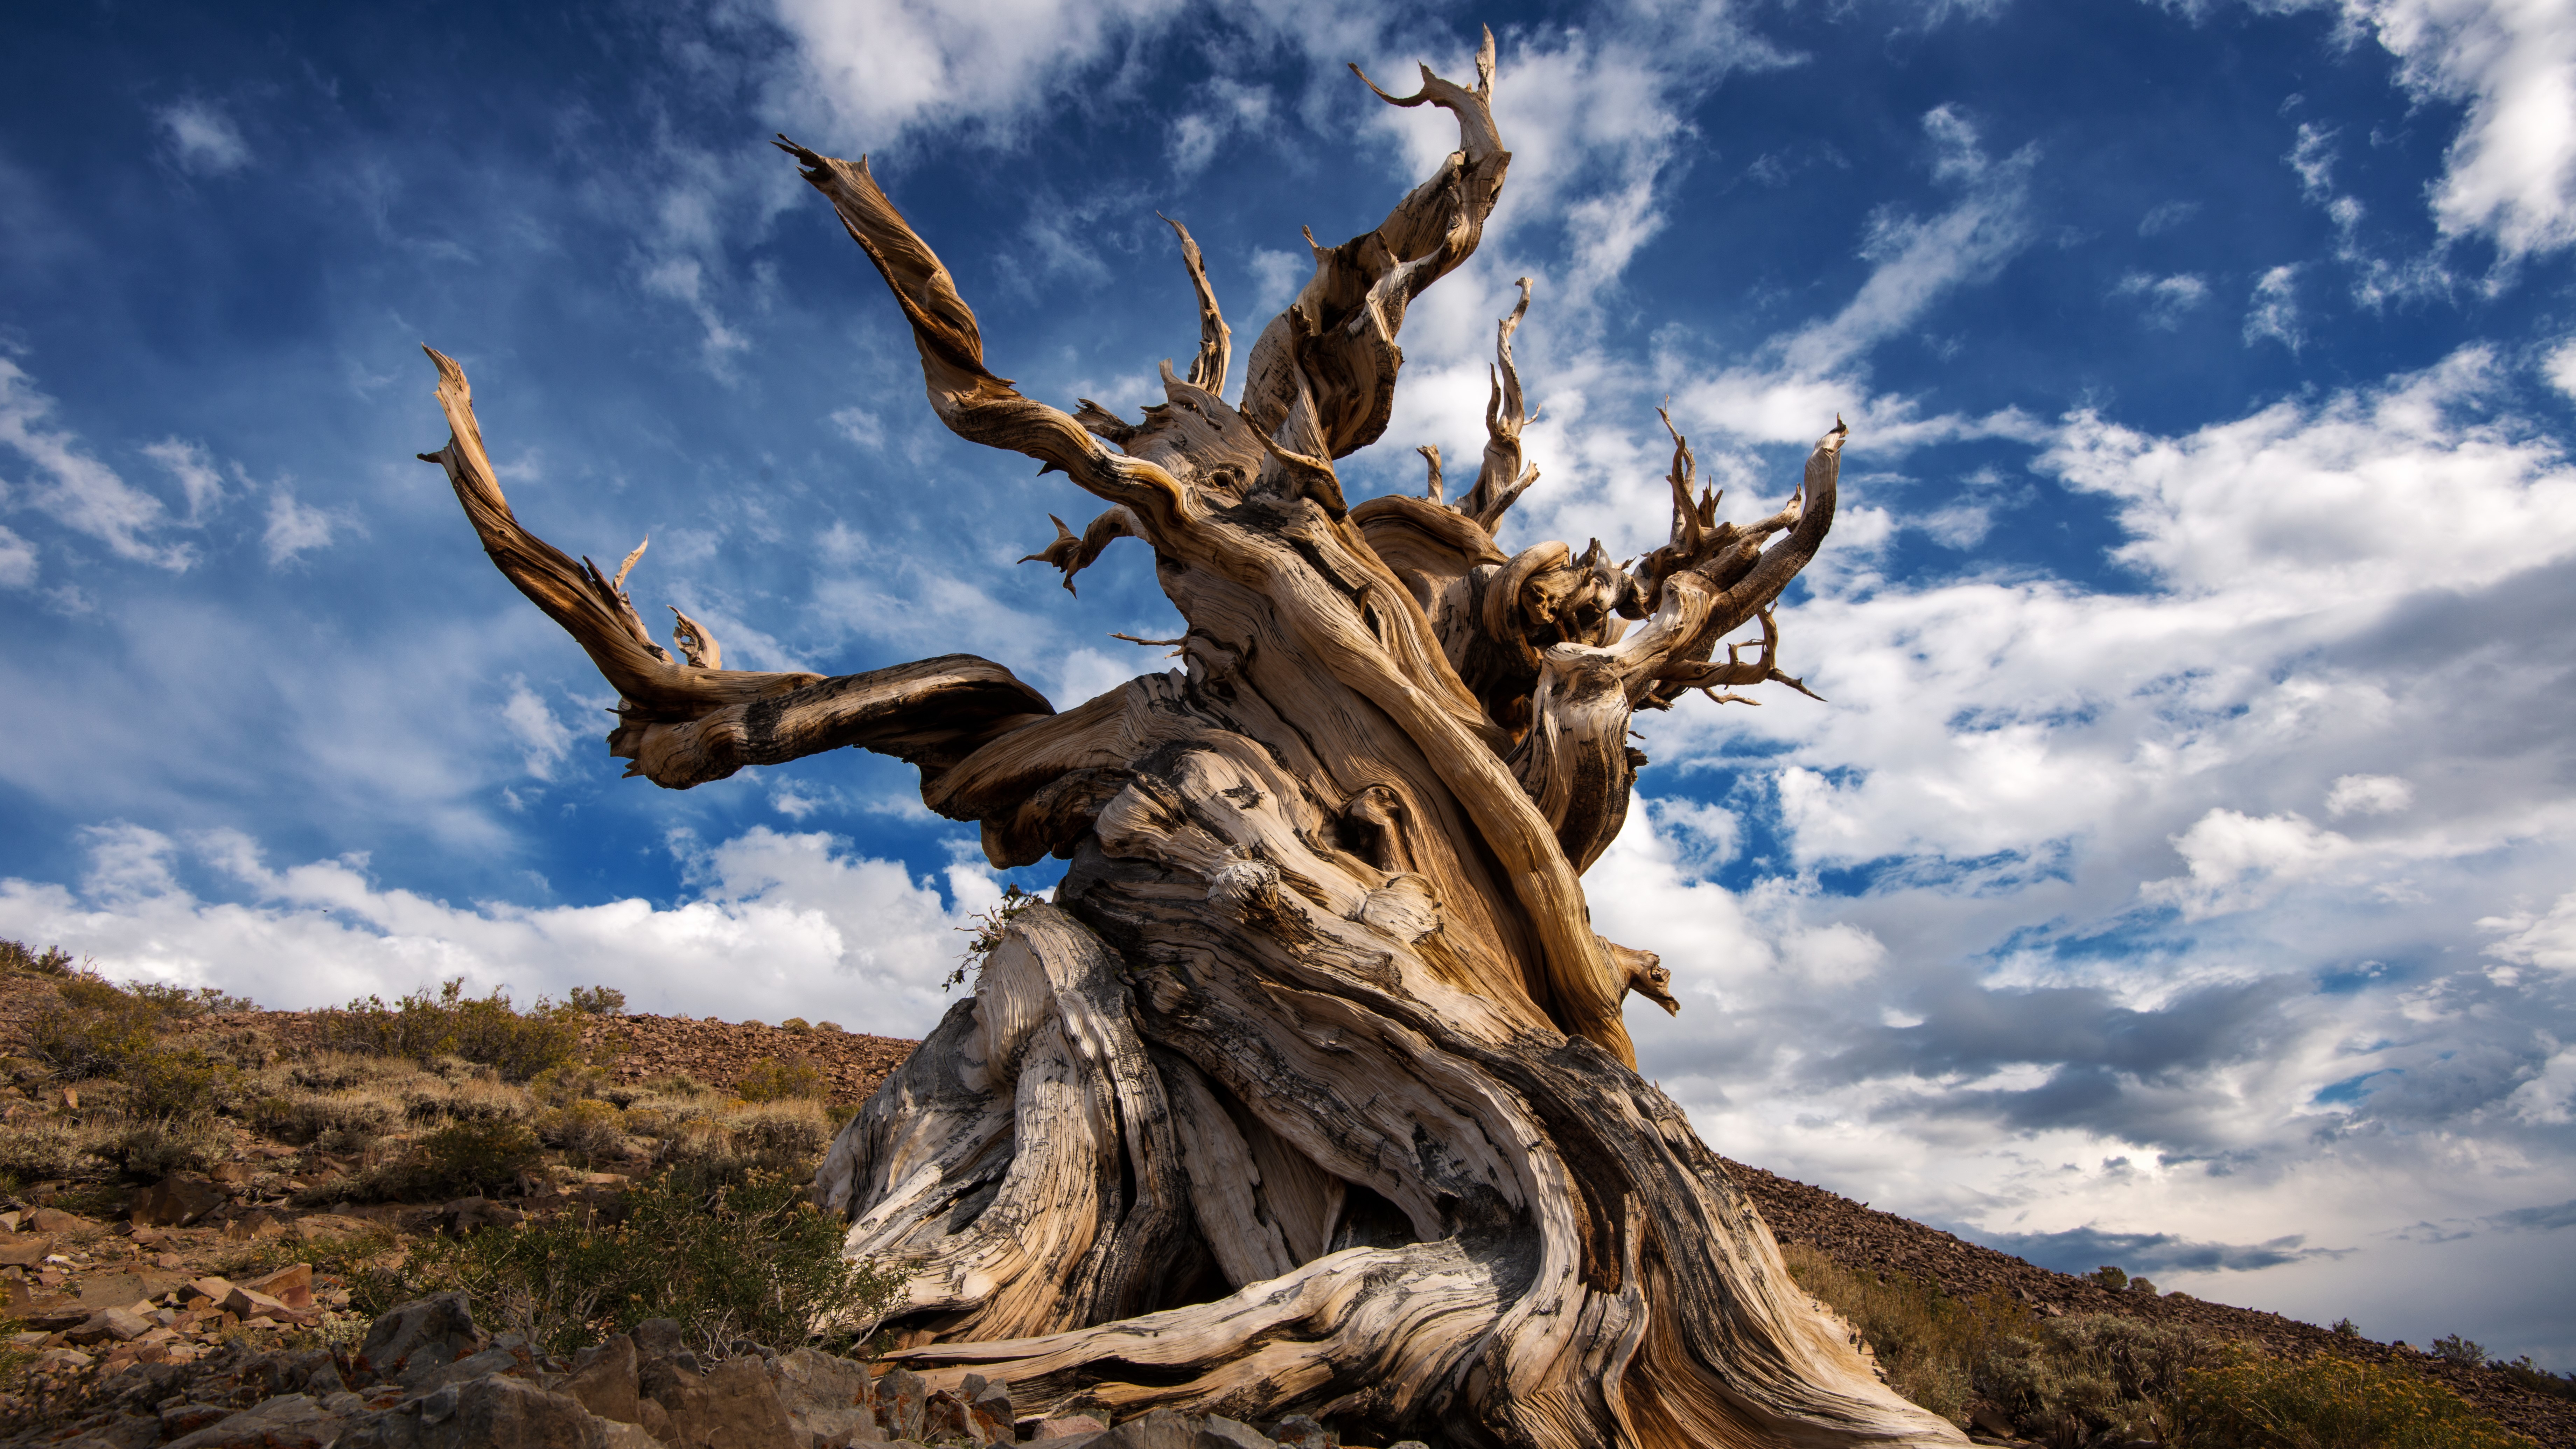 A twisted bristlecone pine on a waterless hill with clouds in the background